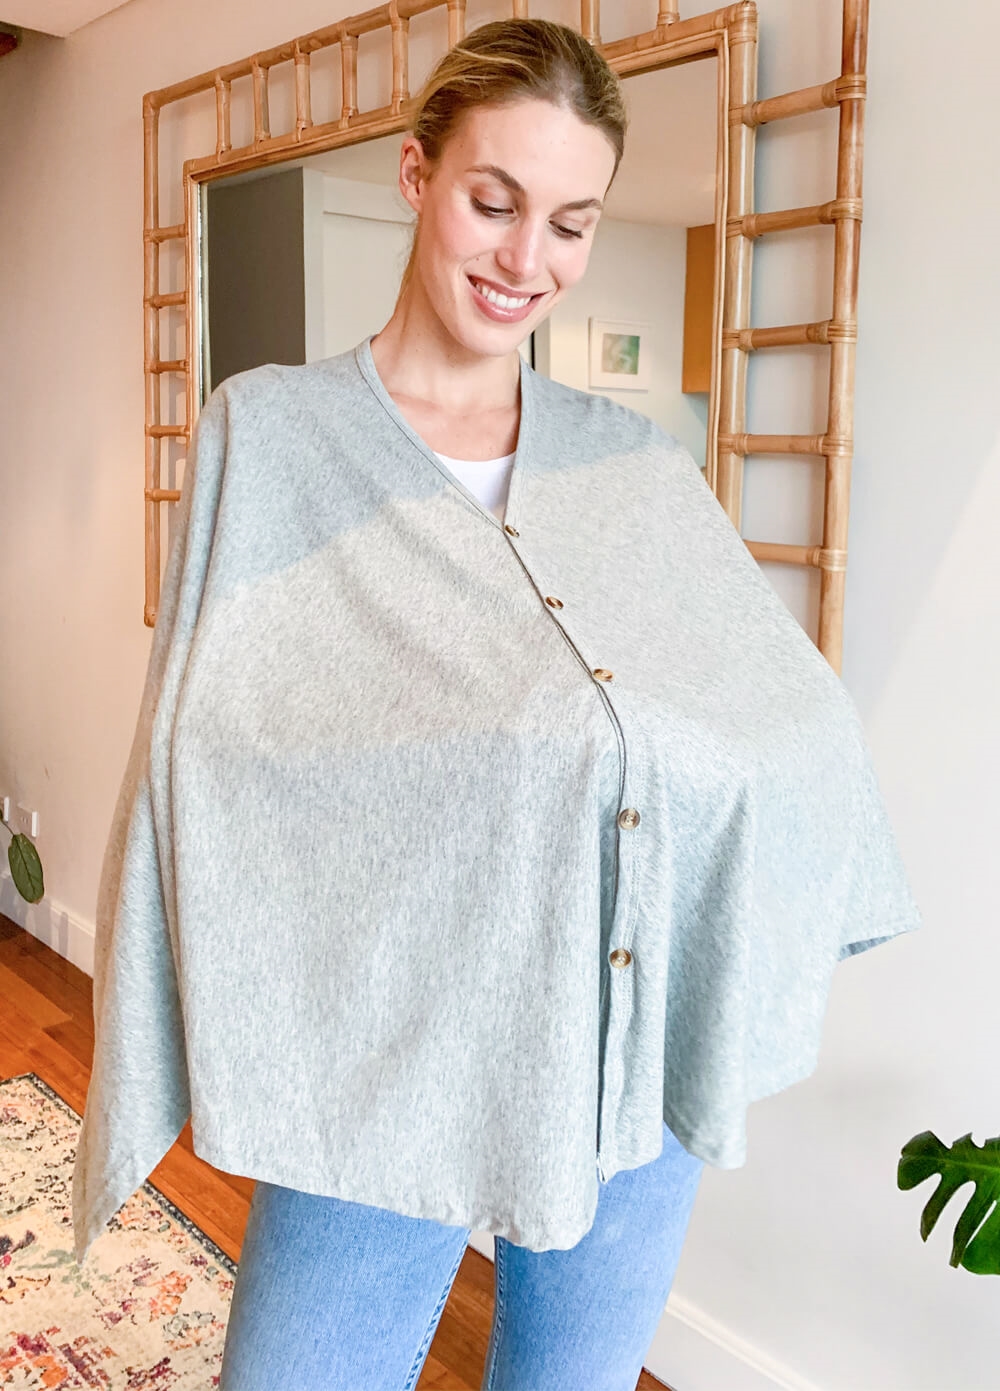 Lait & Co - Nursing Couverture in Light Grey | Queen Bee